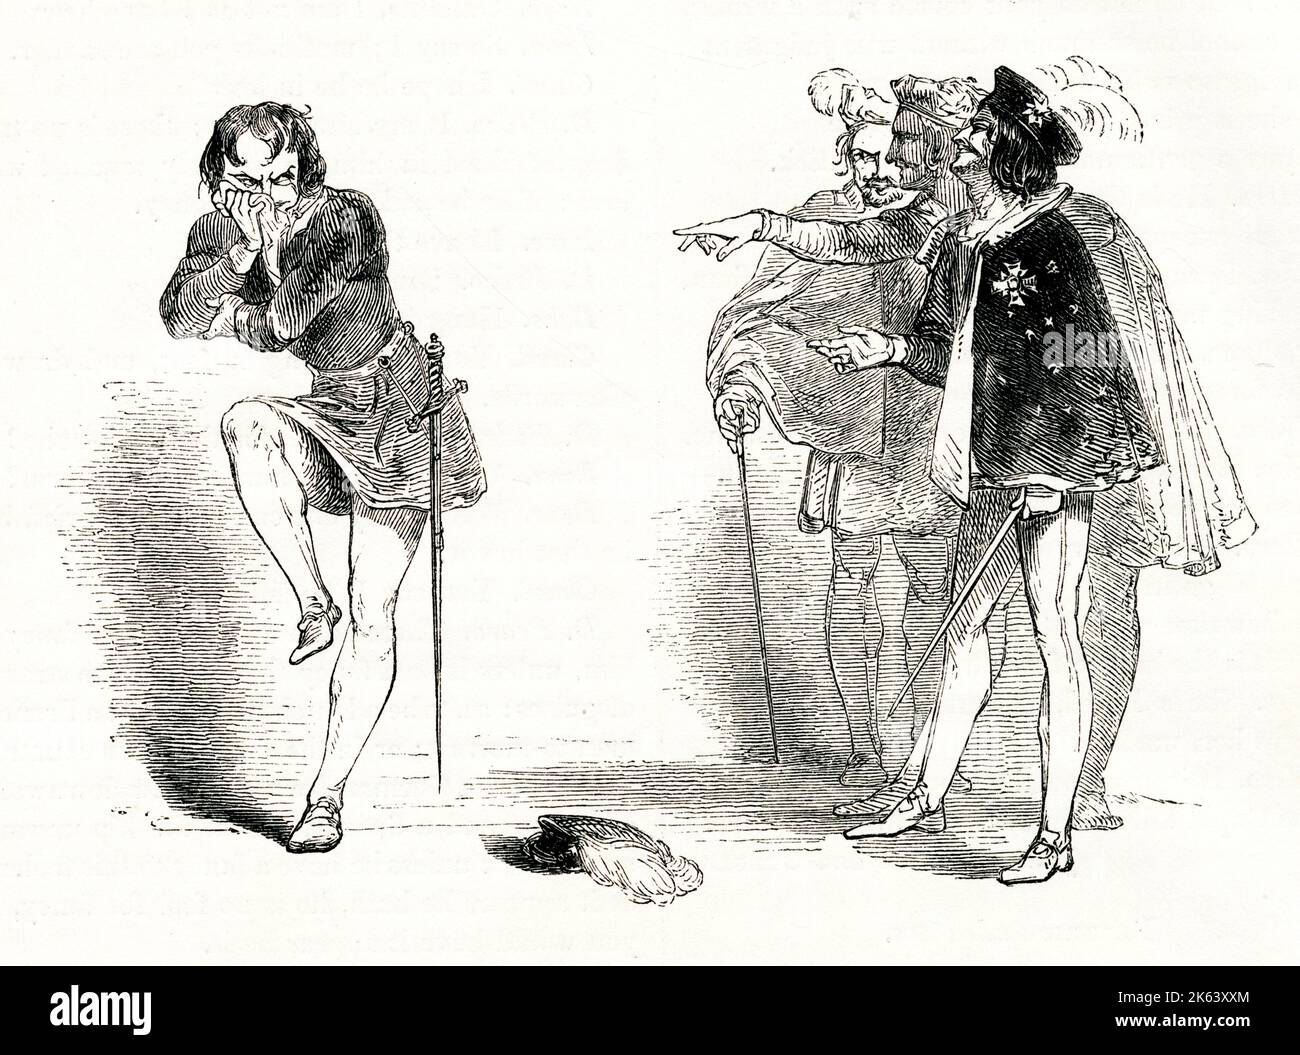 Illustration by Kenny Meadows to Much Ado About Nothing, by William Shakespeare. Benedick, suffering from toothache, is taunted by his friends.      Date: 1840 Stock Photo